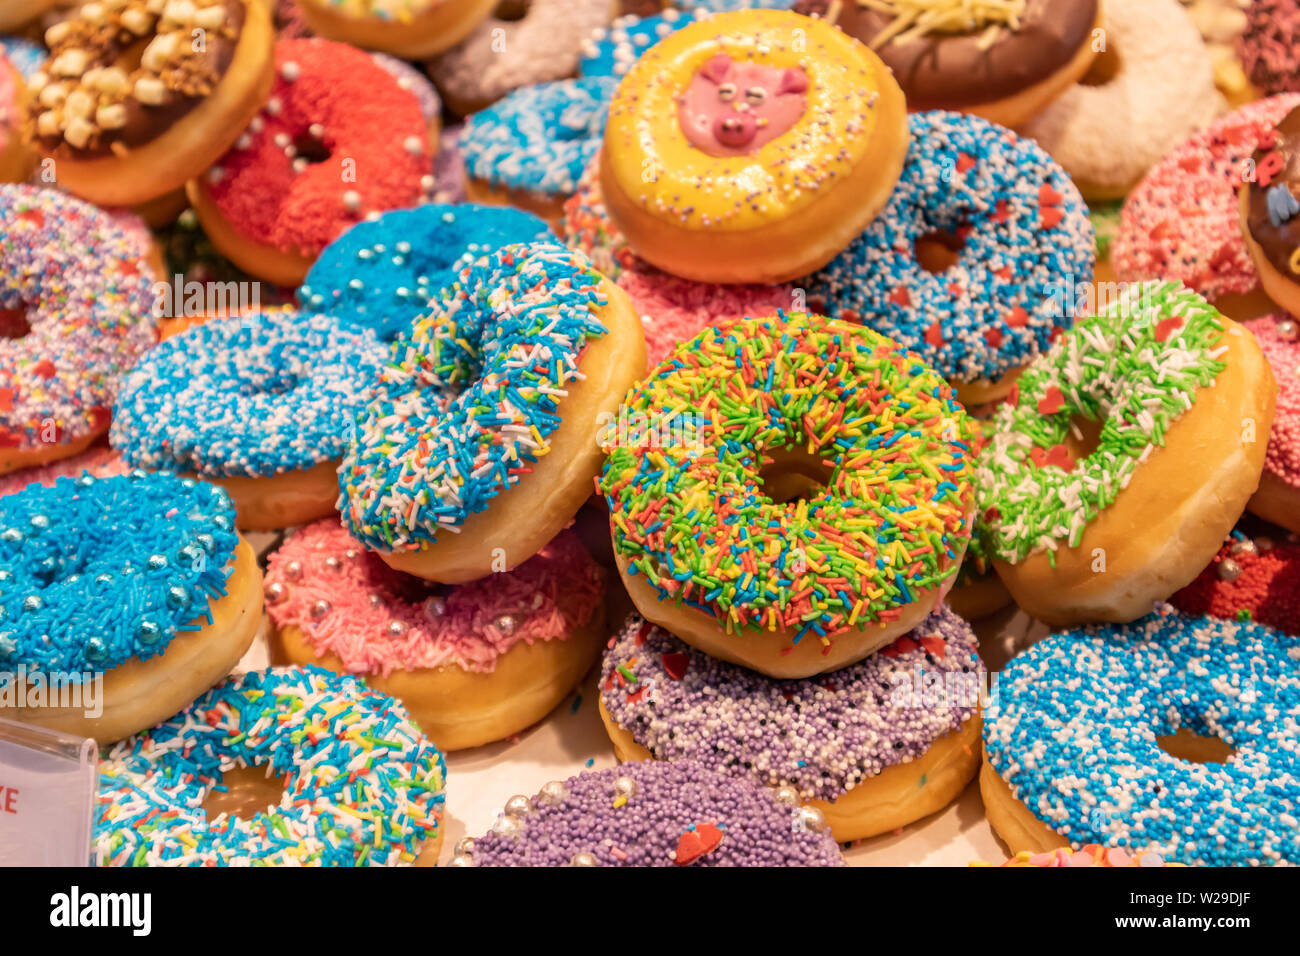 Assorted donuts, bakery display. Colorful donuts assortment background. Close up view Stock Photo